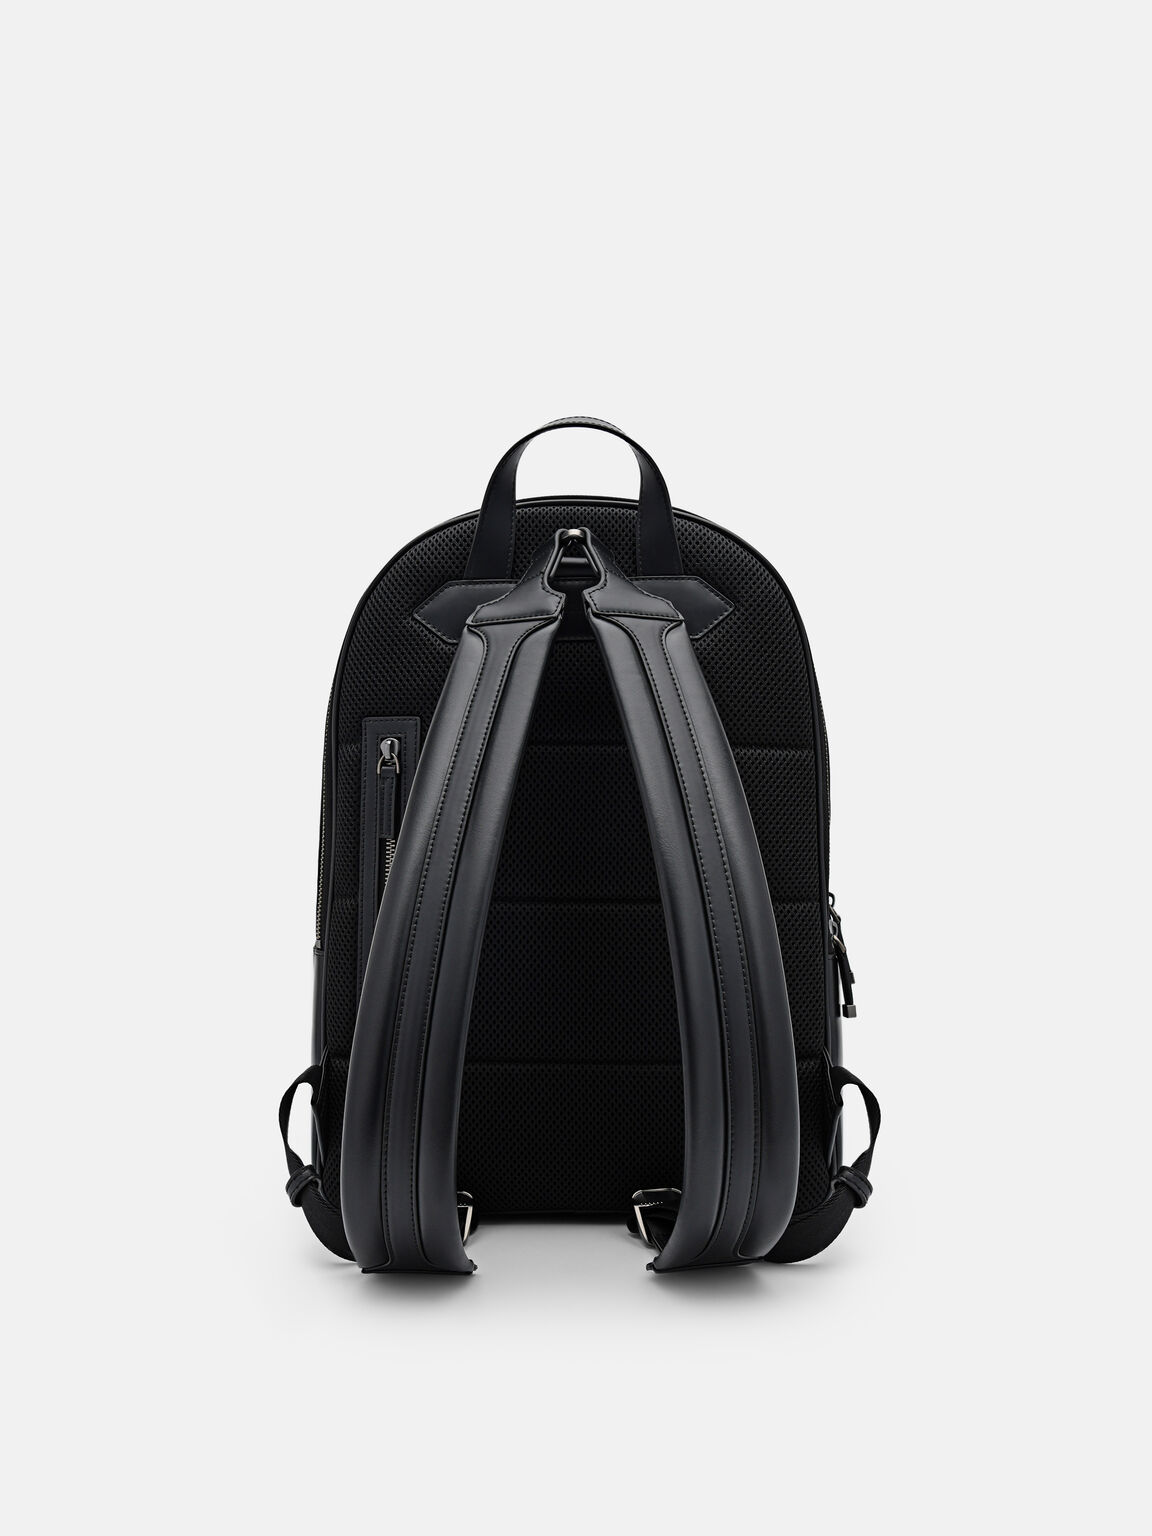 PEDRO Men's CASUAL BACKPACK (Black) - Bags at Purse Site